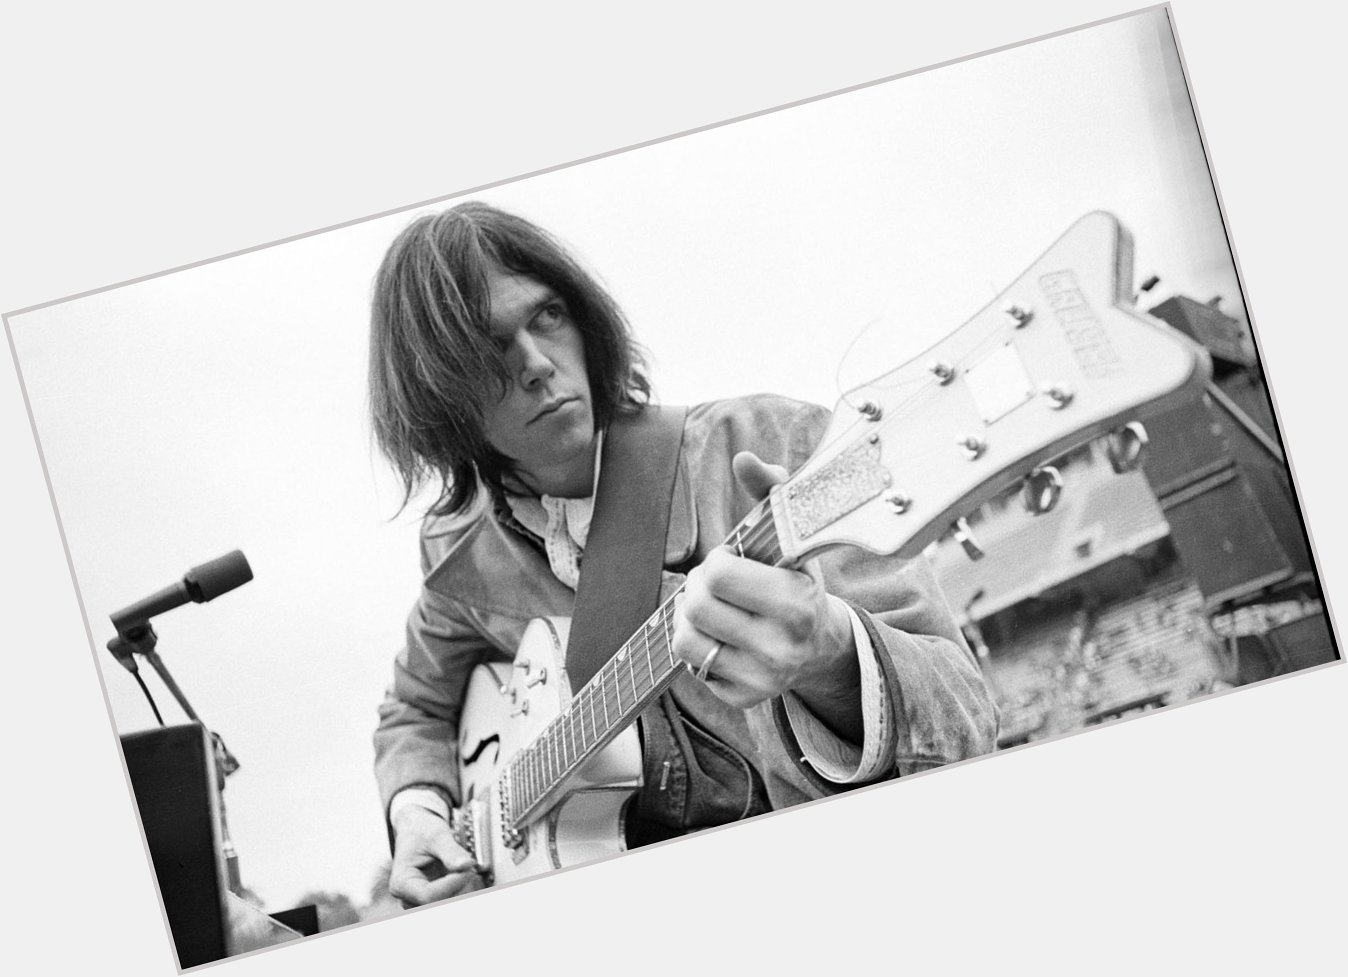 "Rock and roll is here to stay."

Happy 69th birthday to Neil Young. 